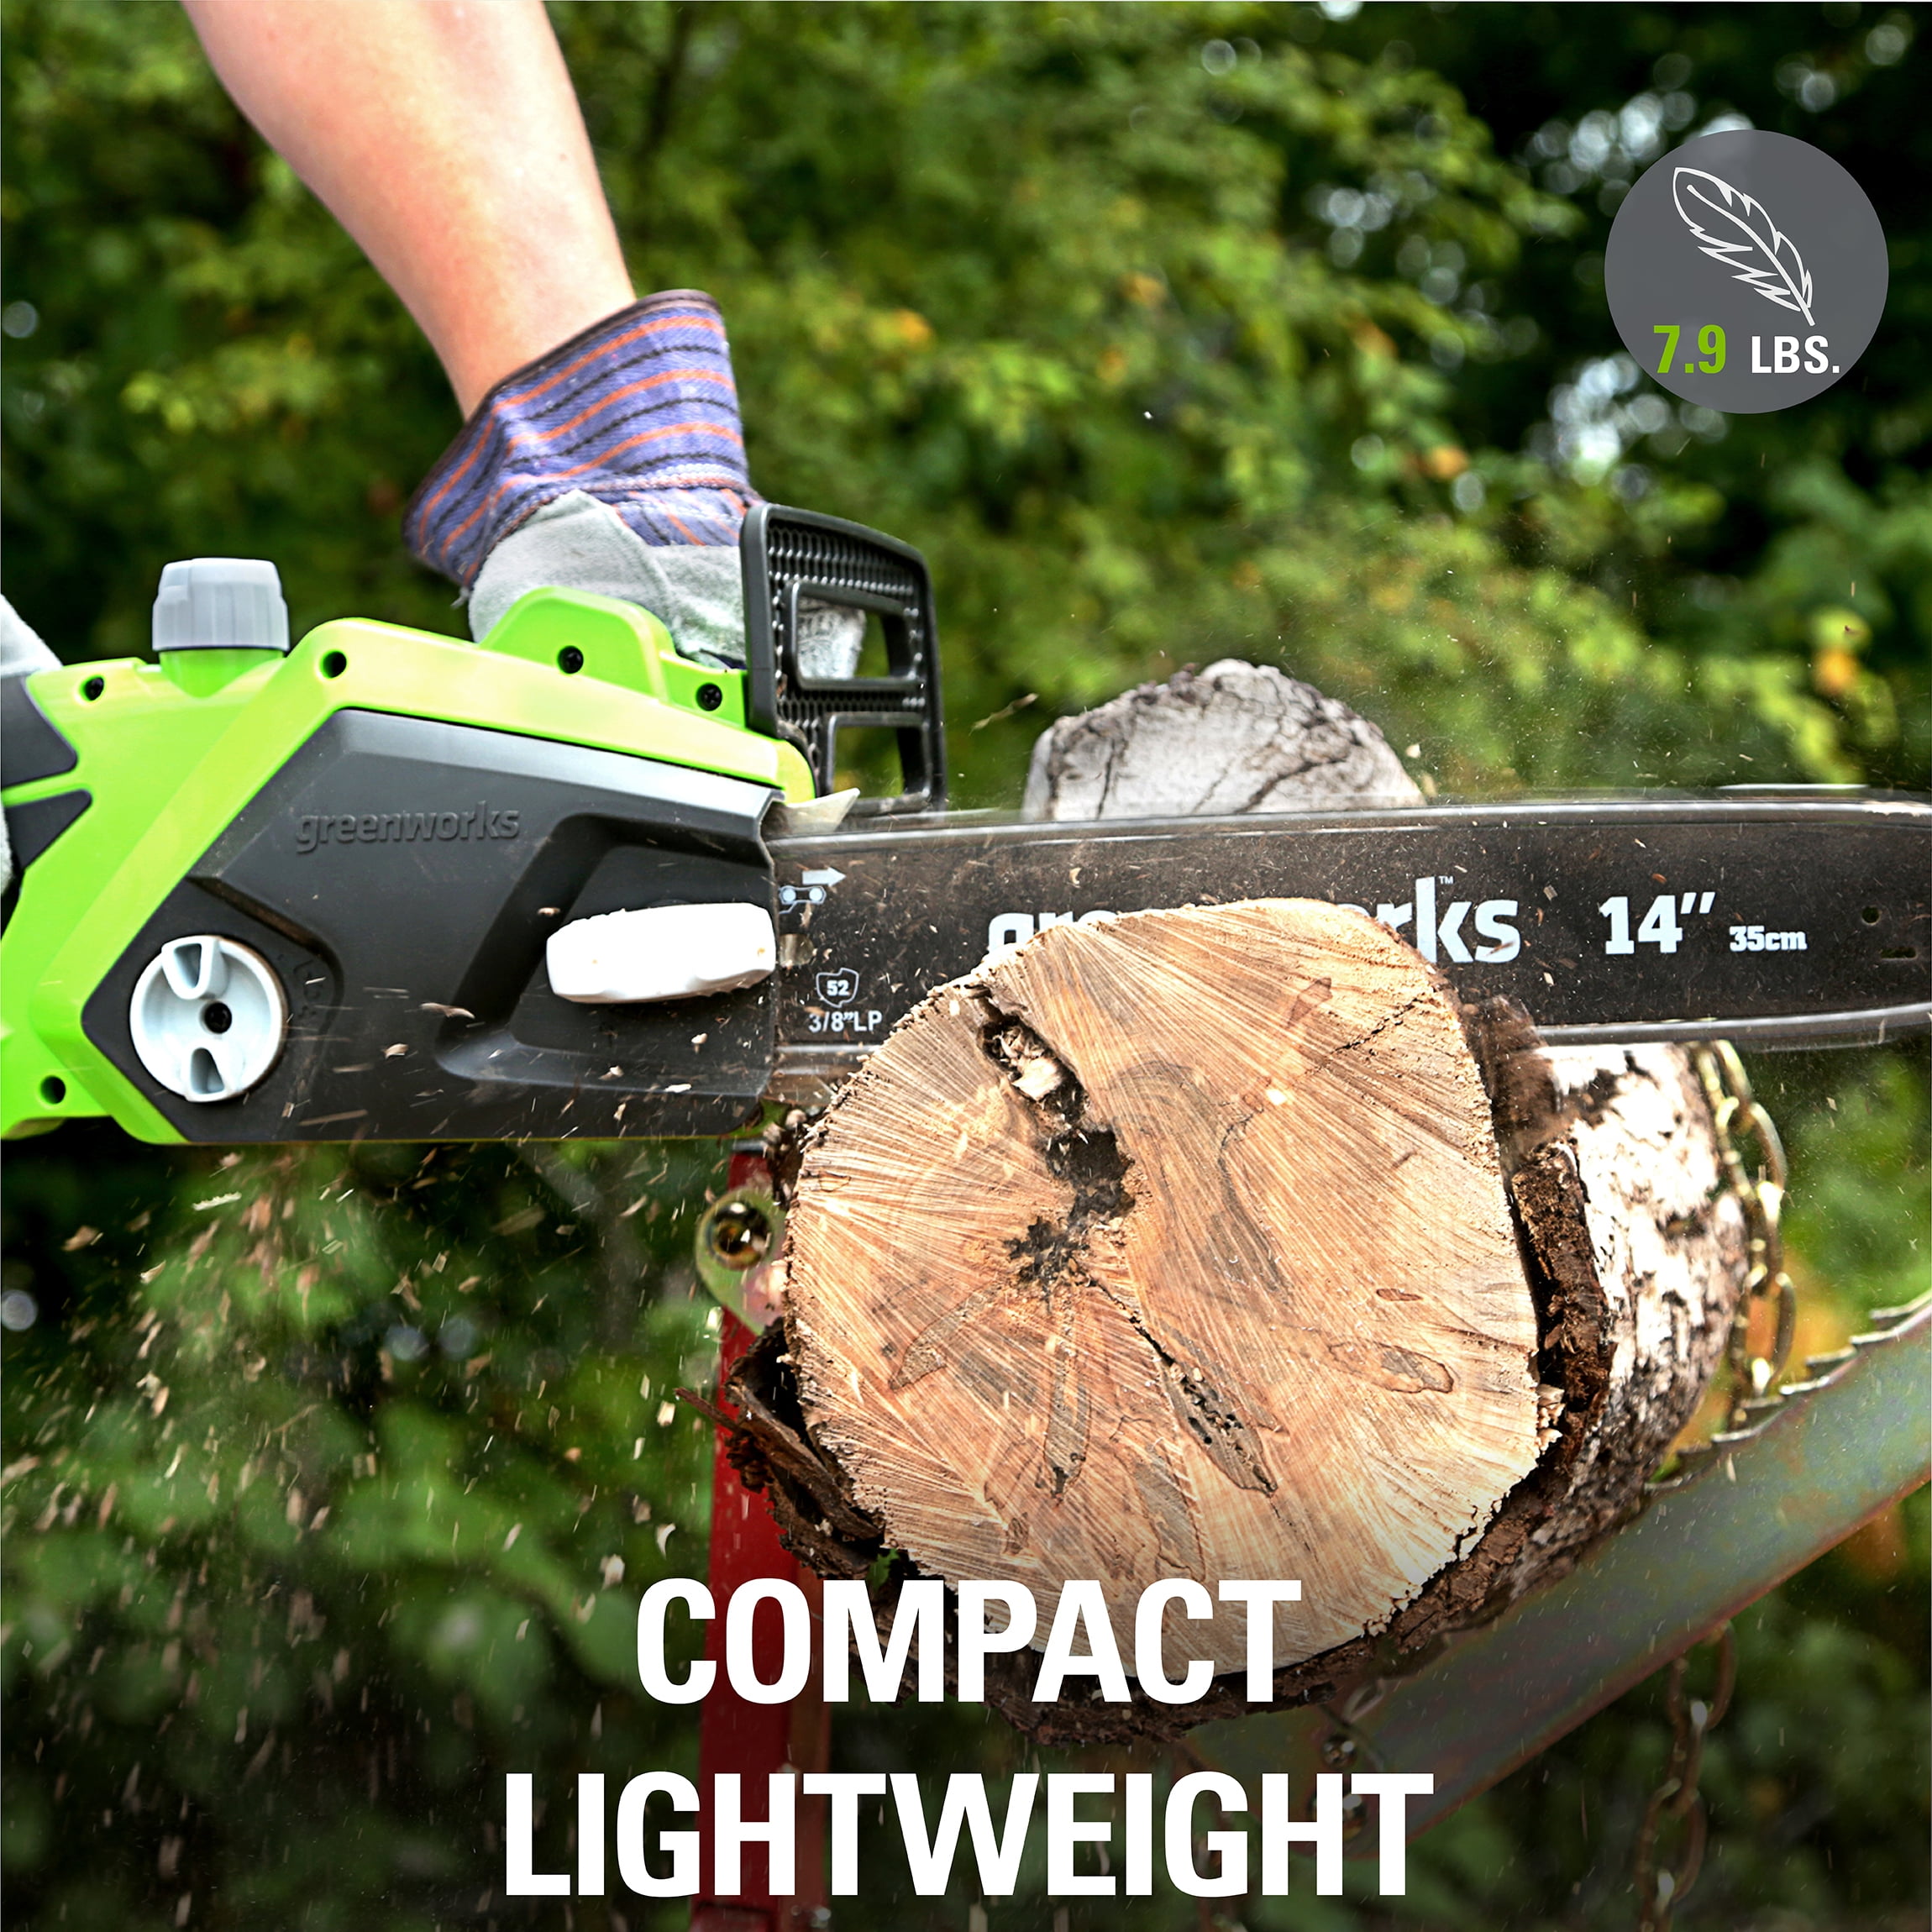 This mini chainsaw 'works like a charm' — and it's only $58 on